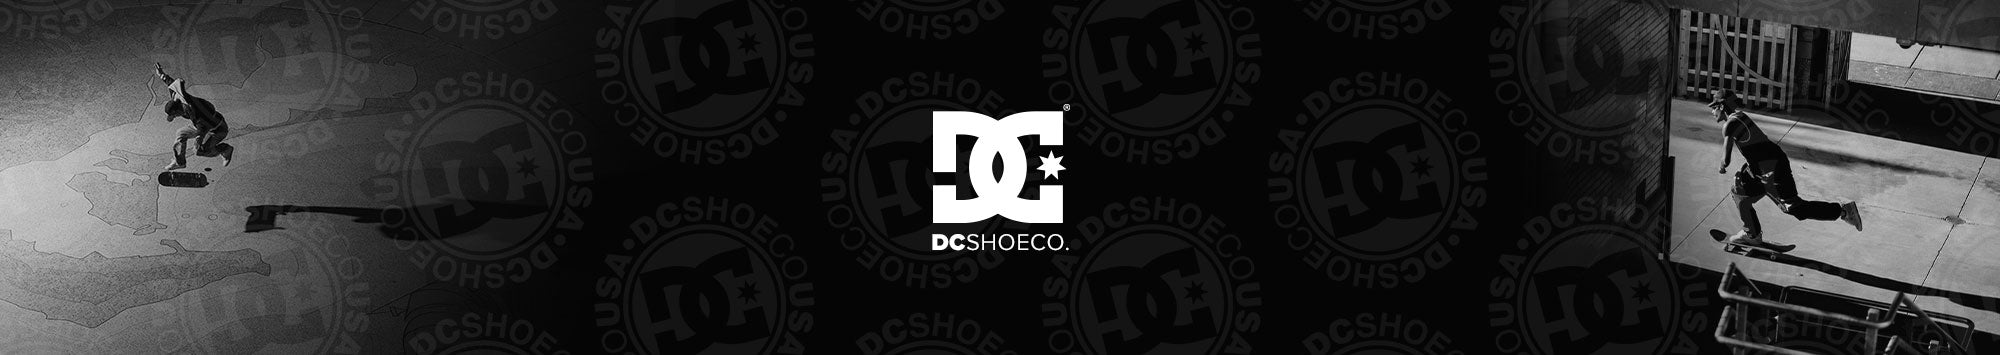 DC Skate Shoes and Snow Gear - CCS